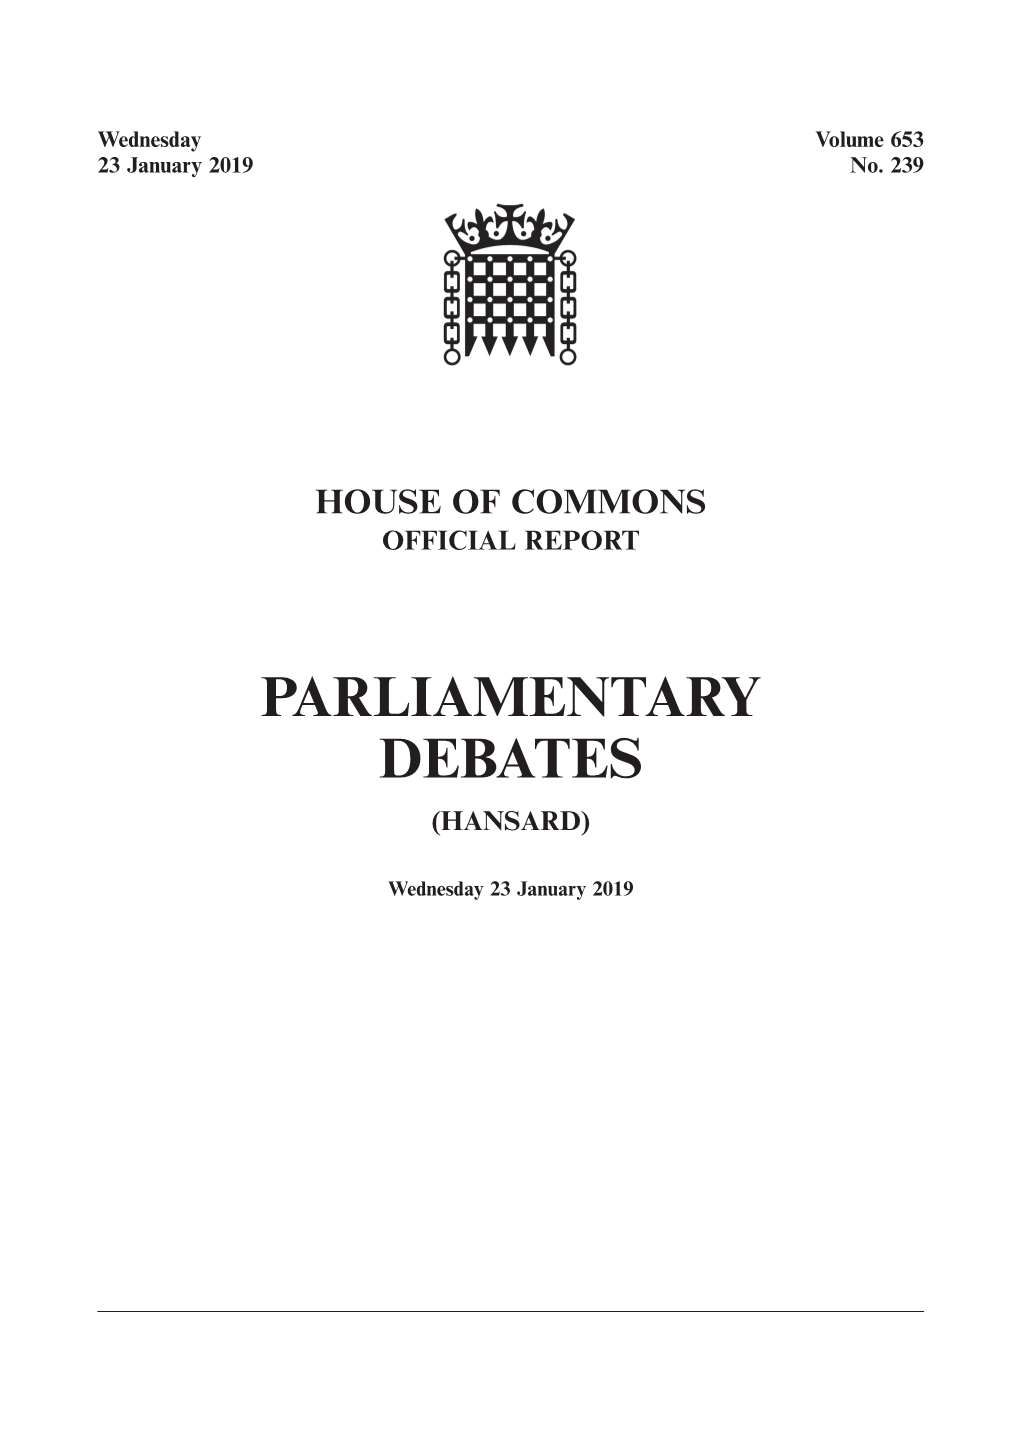 Whole Day Download the Hansard Record of the Entire Day in PDF Format. PDF File, 0.92